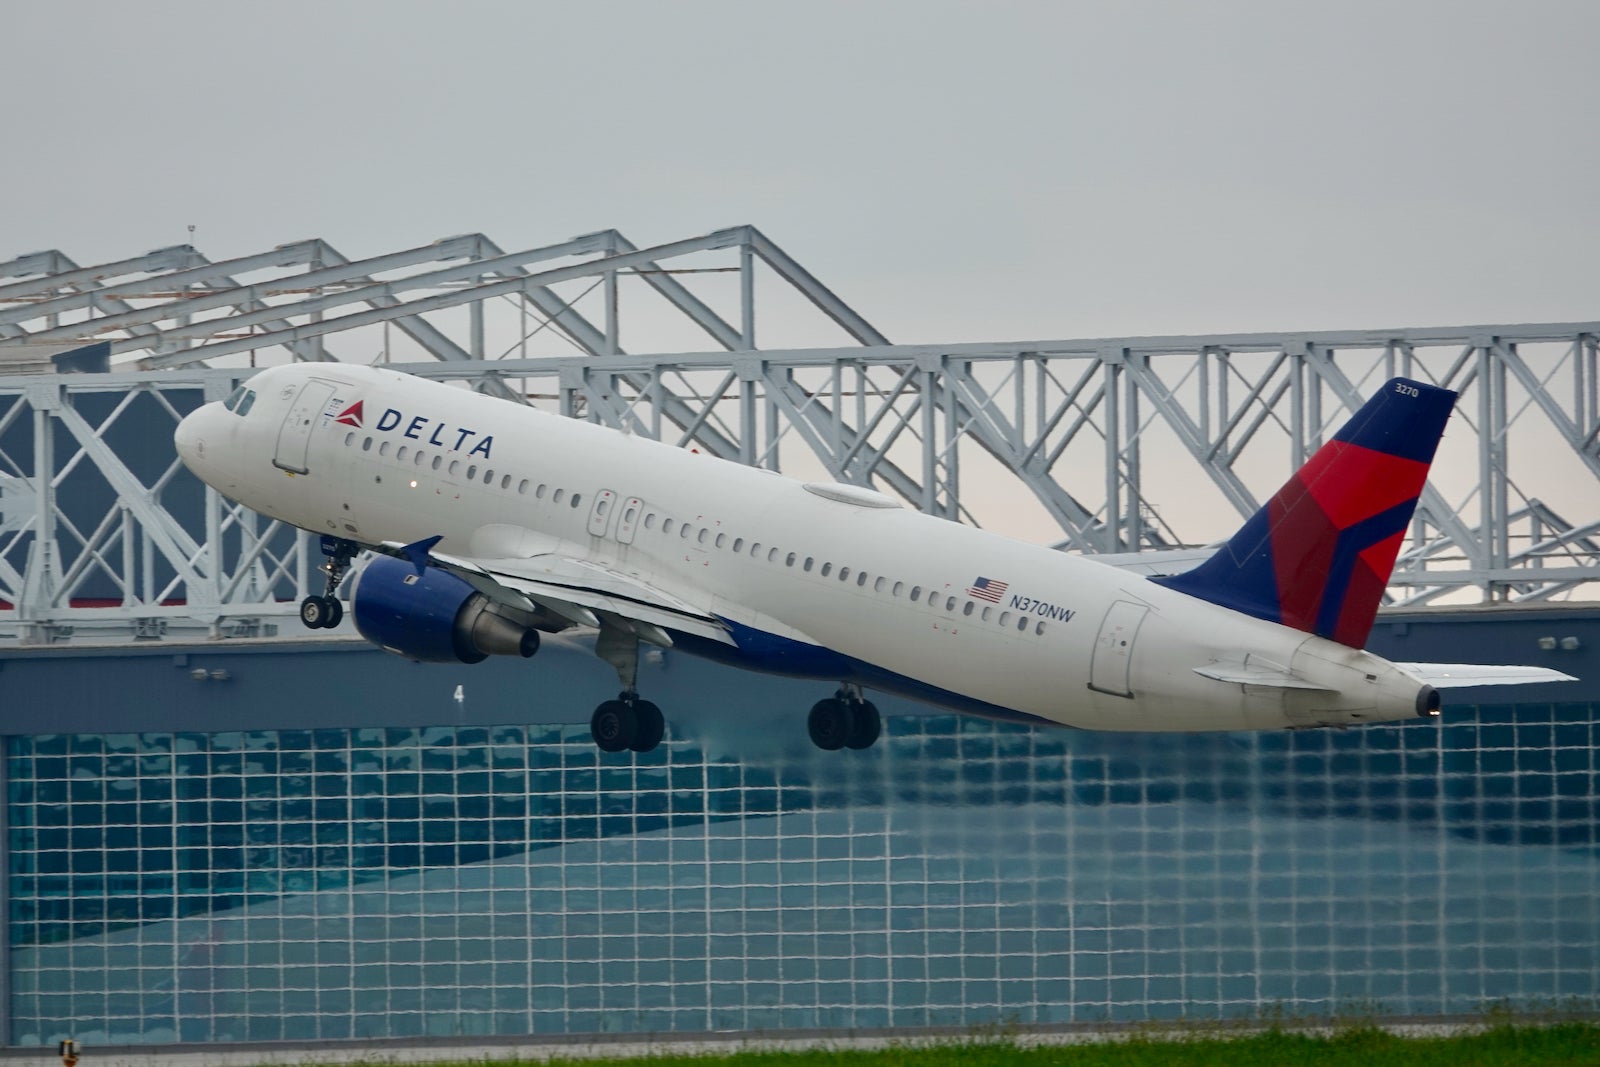 Delta Airbus A320 Takeoff